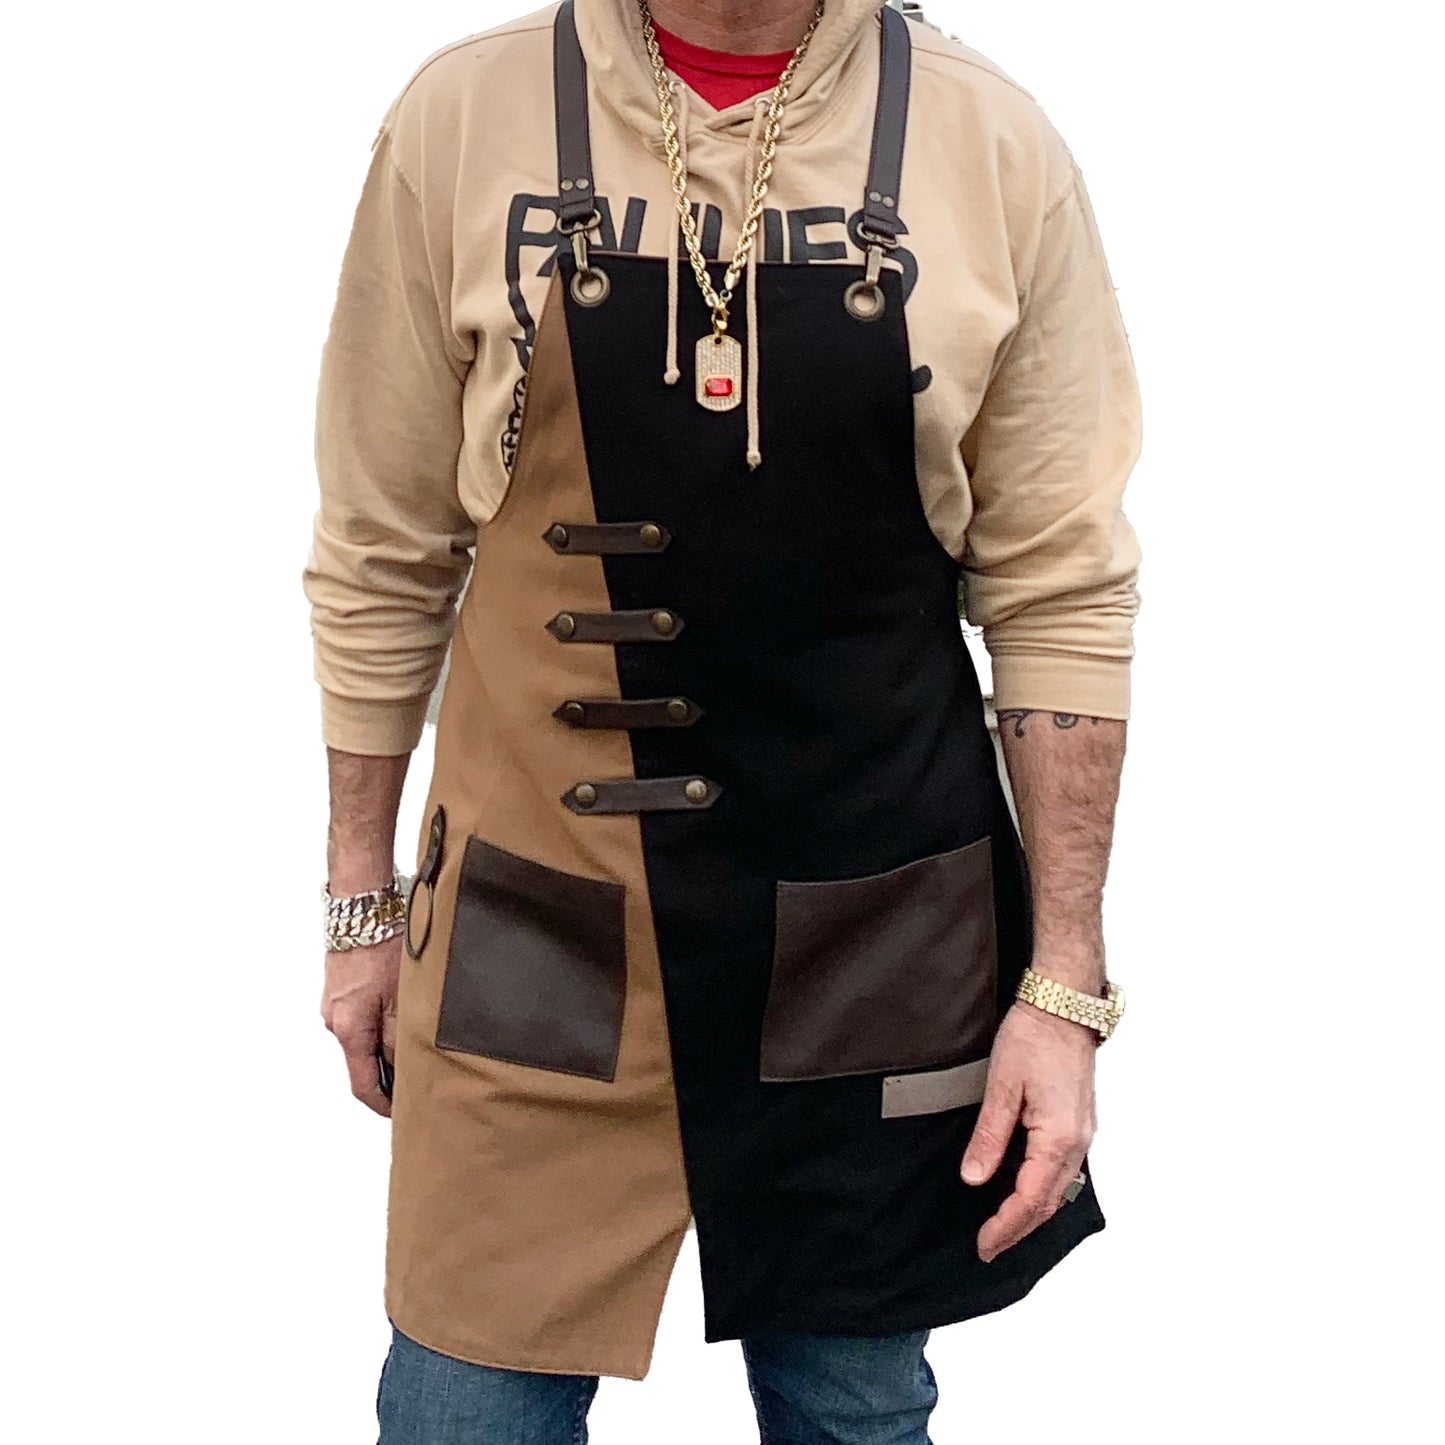 Utility Apron By Zouhad Black and Brown